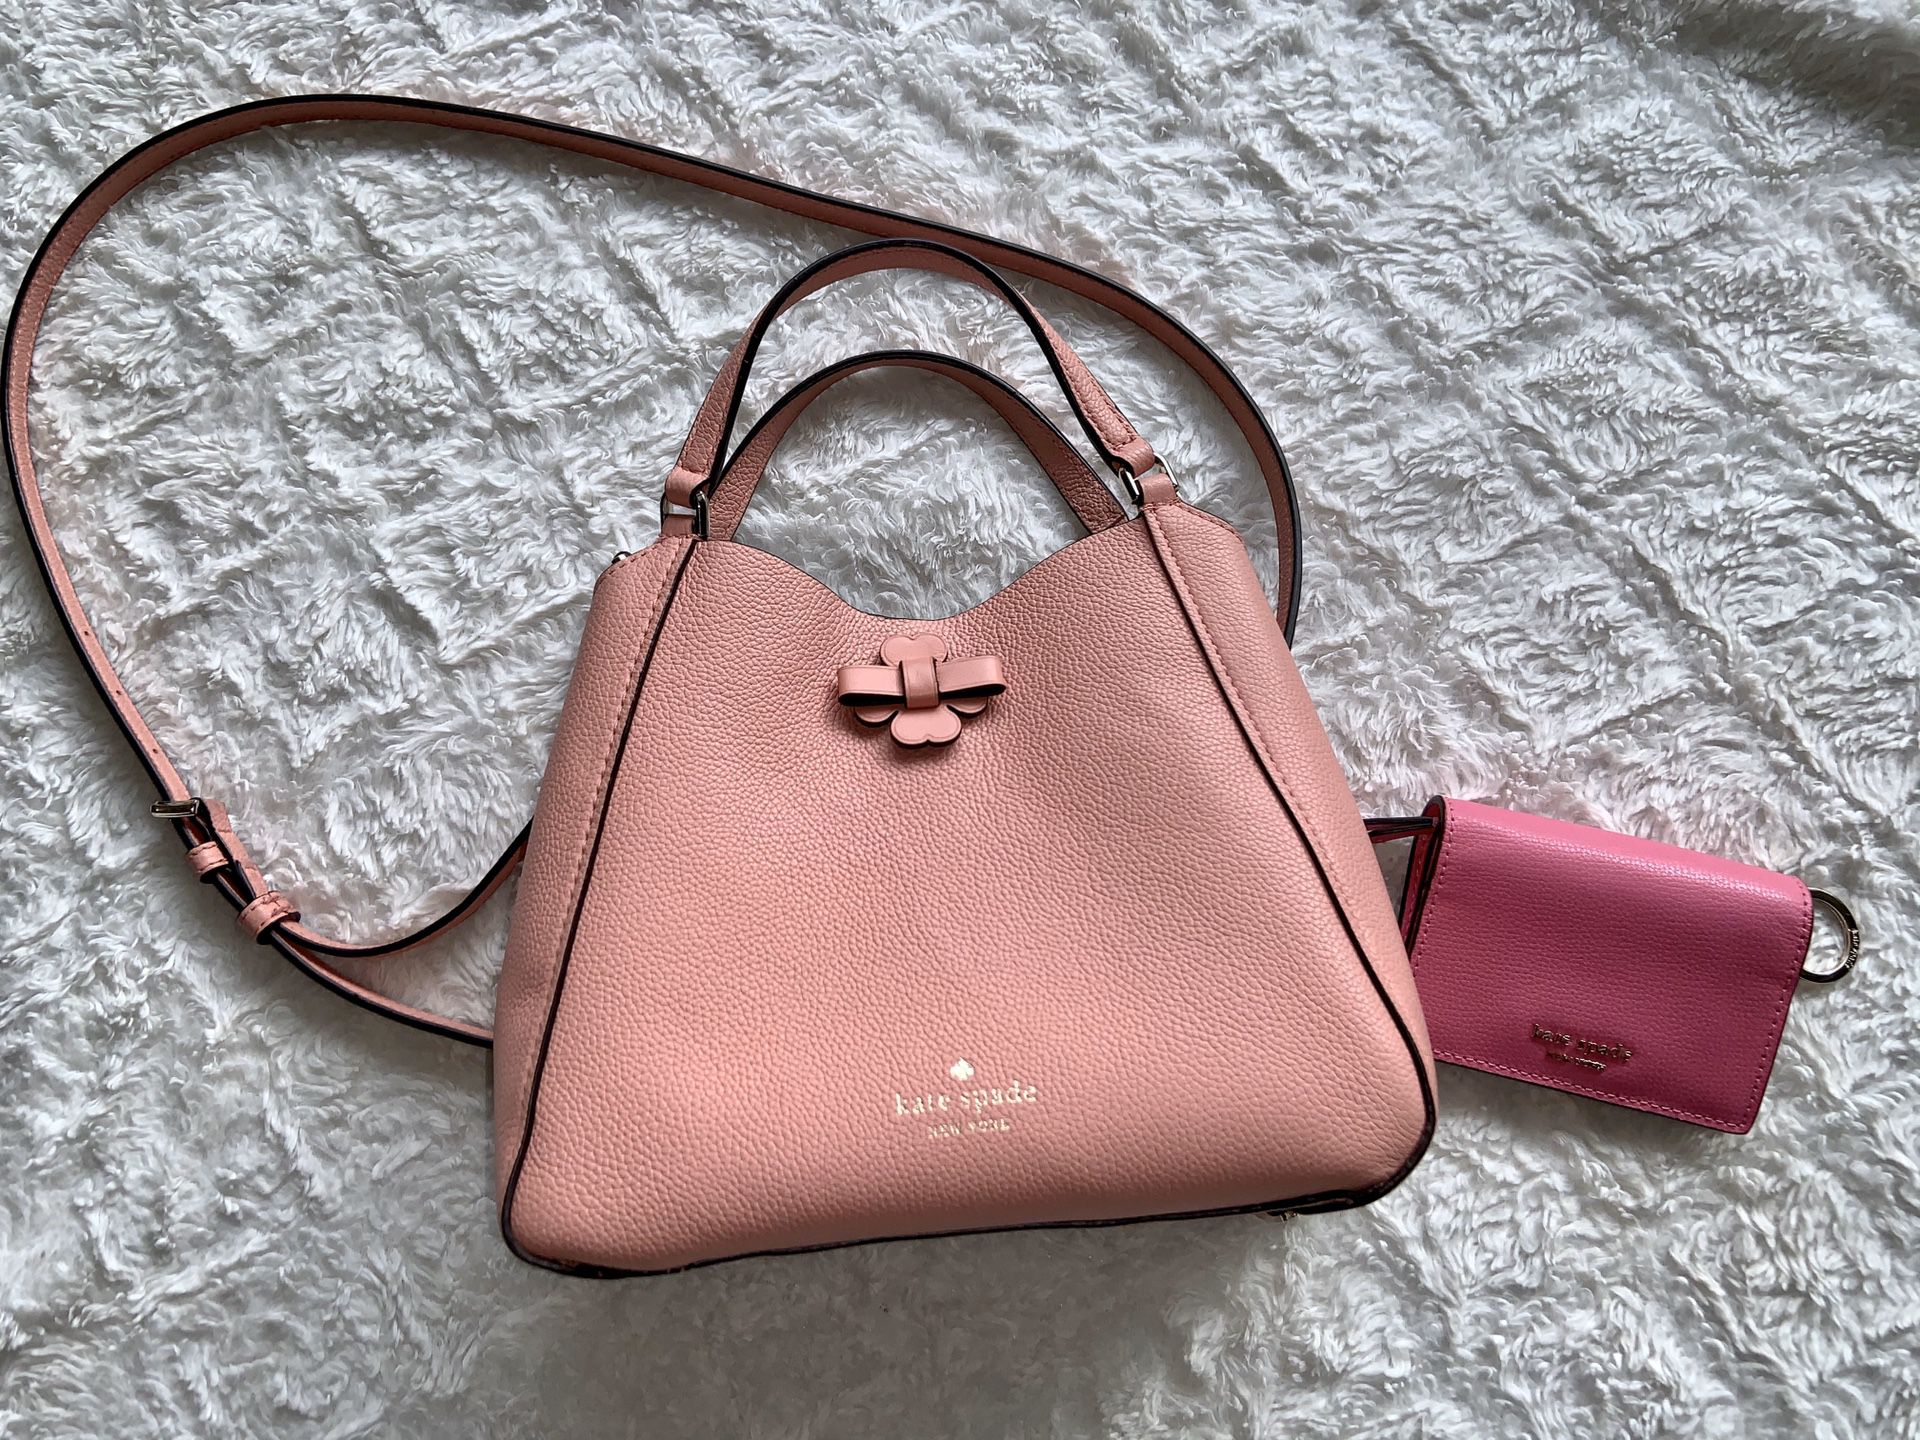 Kate Spade purse and wallet